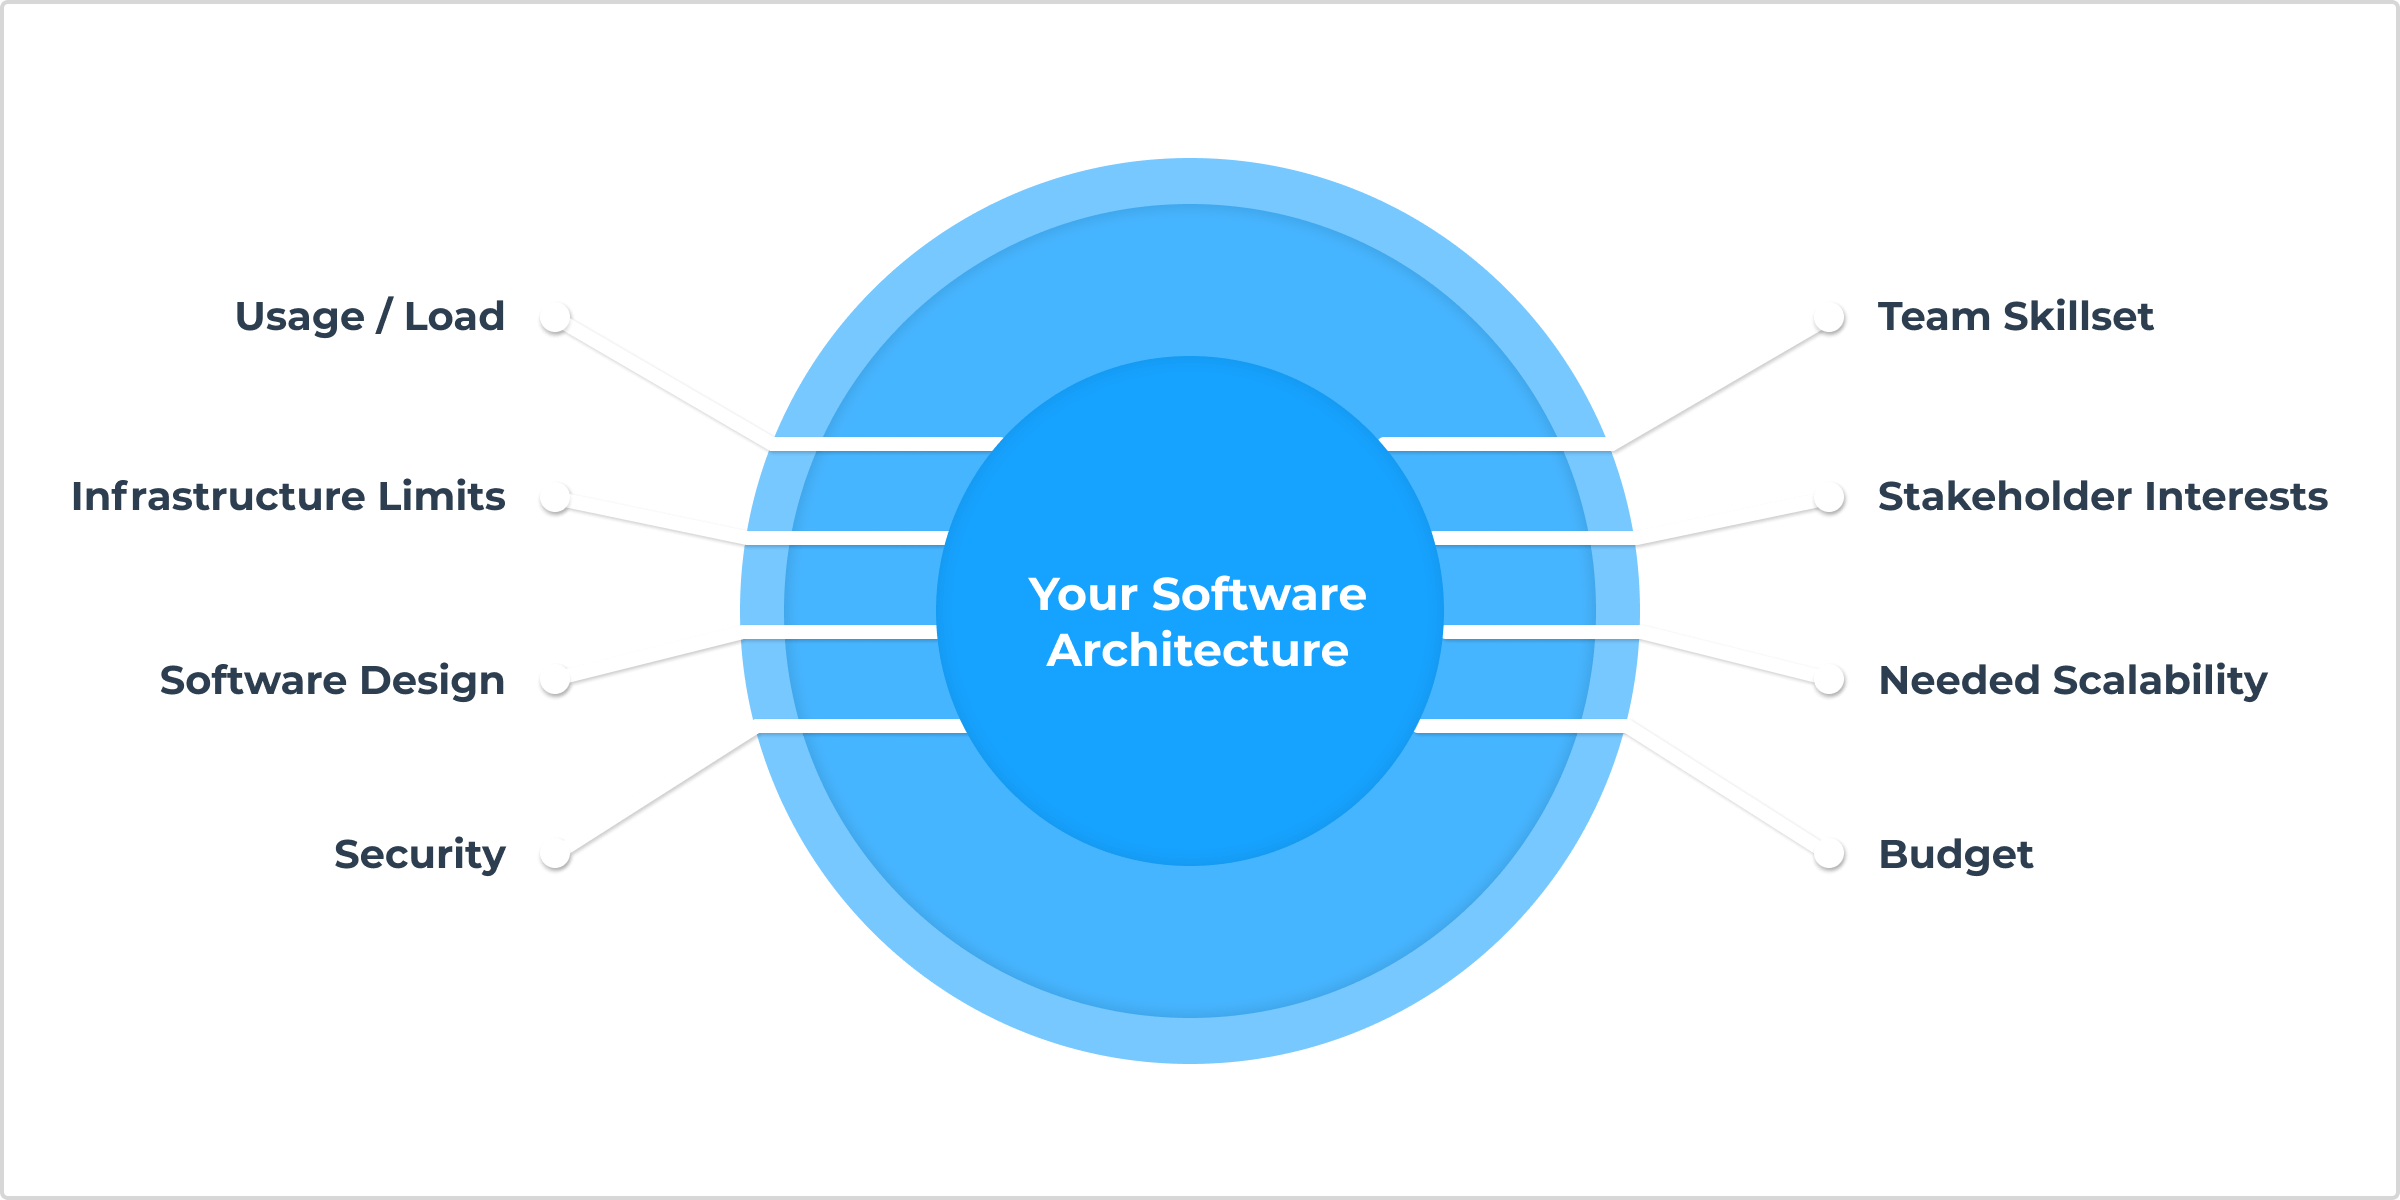 A variety of perspectives are important when creating your software architecture